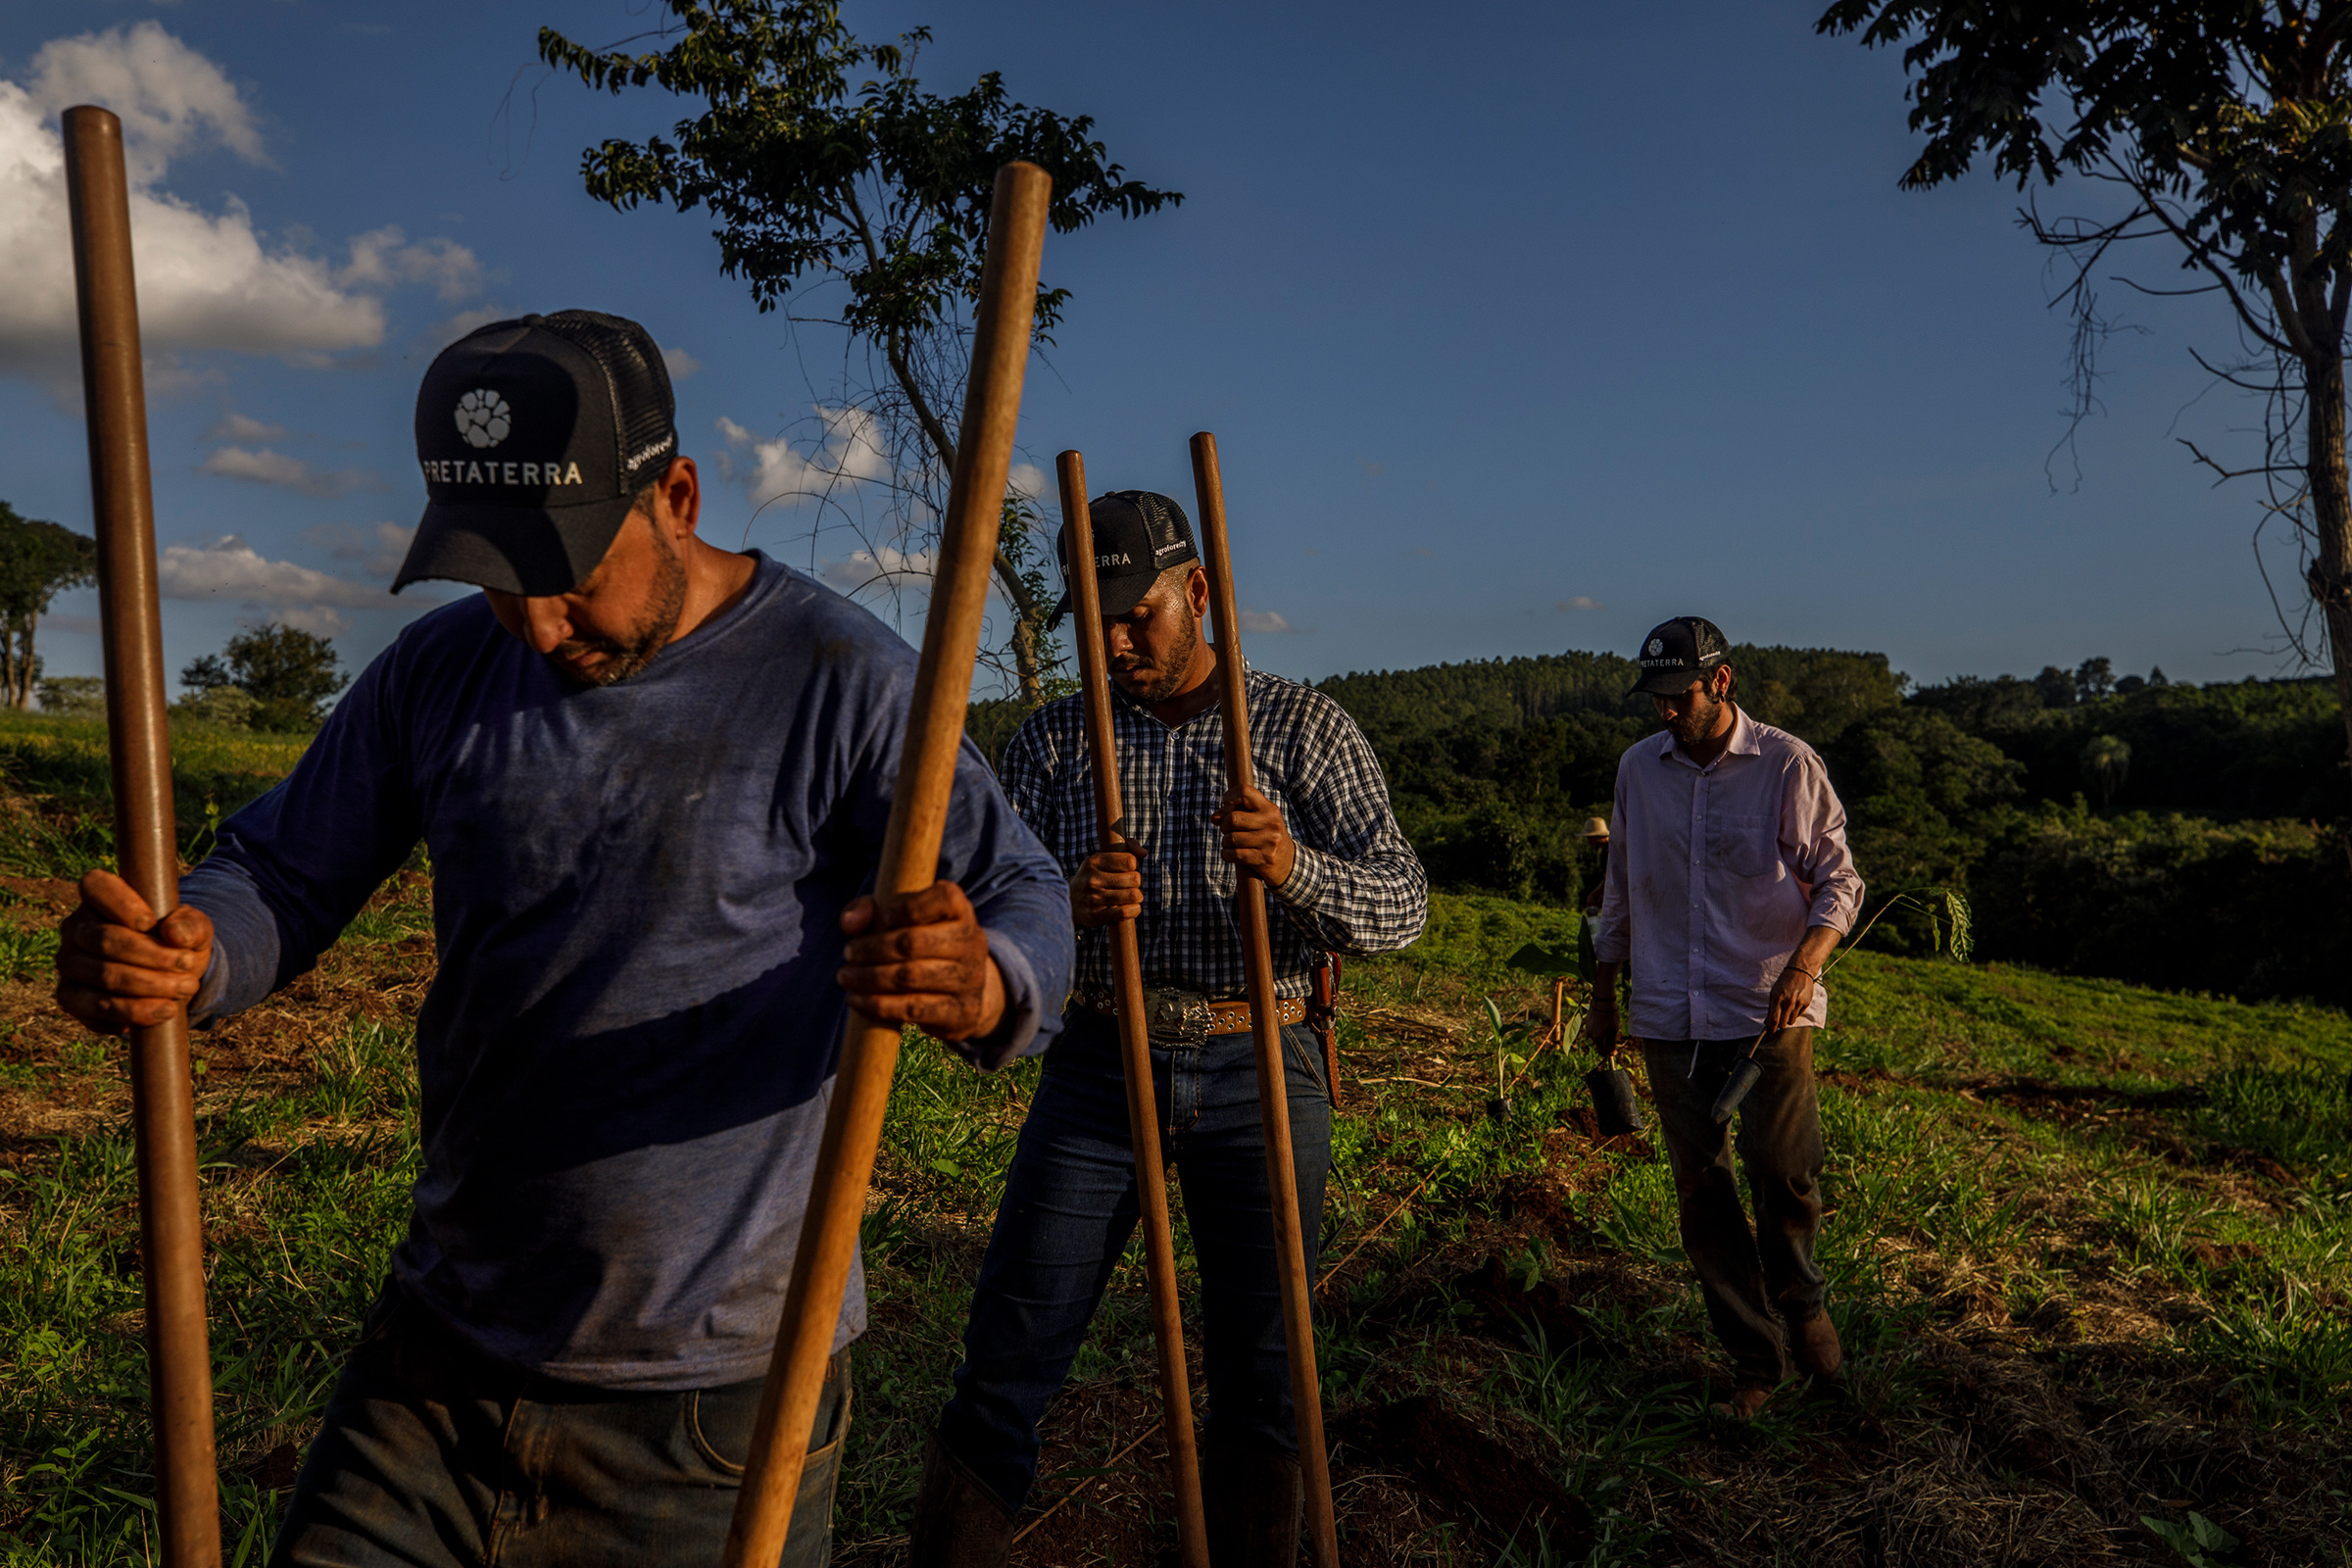 Workers plant tree seedlings to restore the soil at Preta Terra’s Timburi agroforestry project. (Victor Moriyama for TIME)